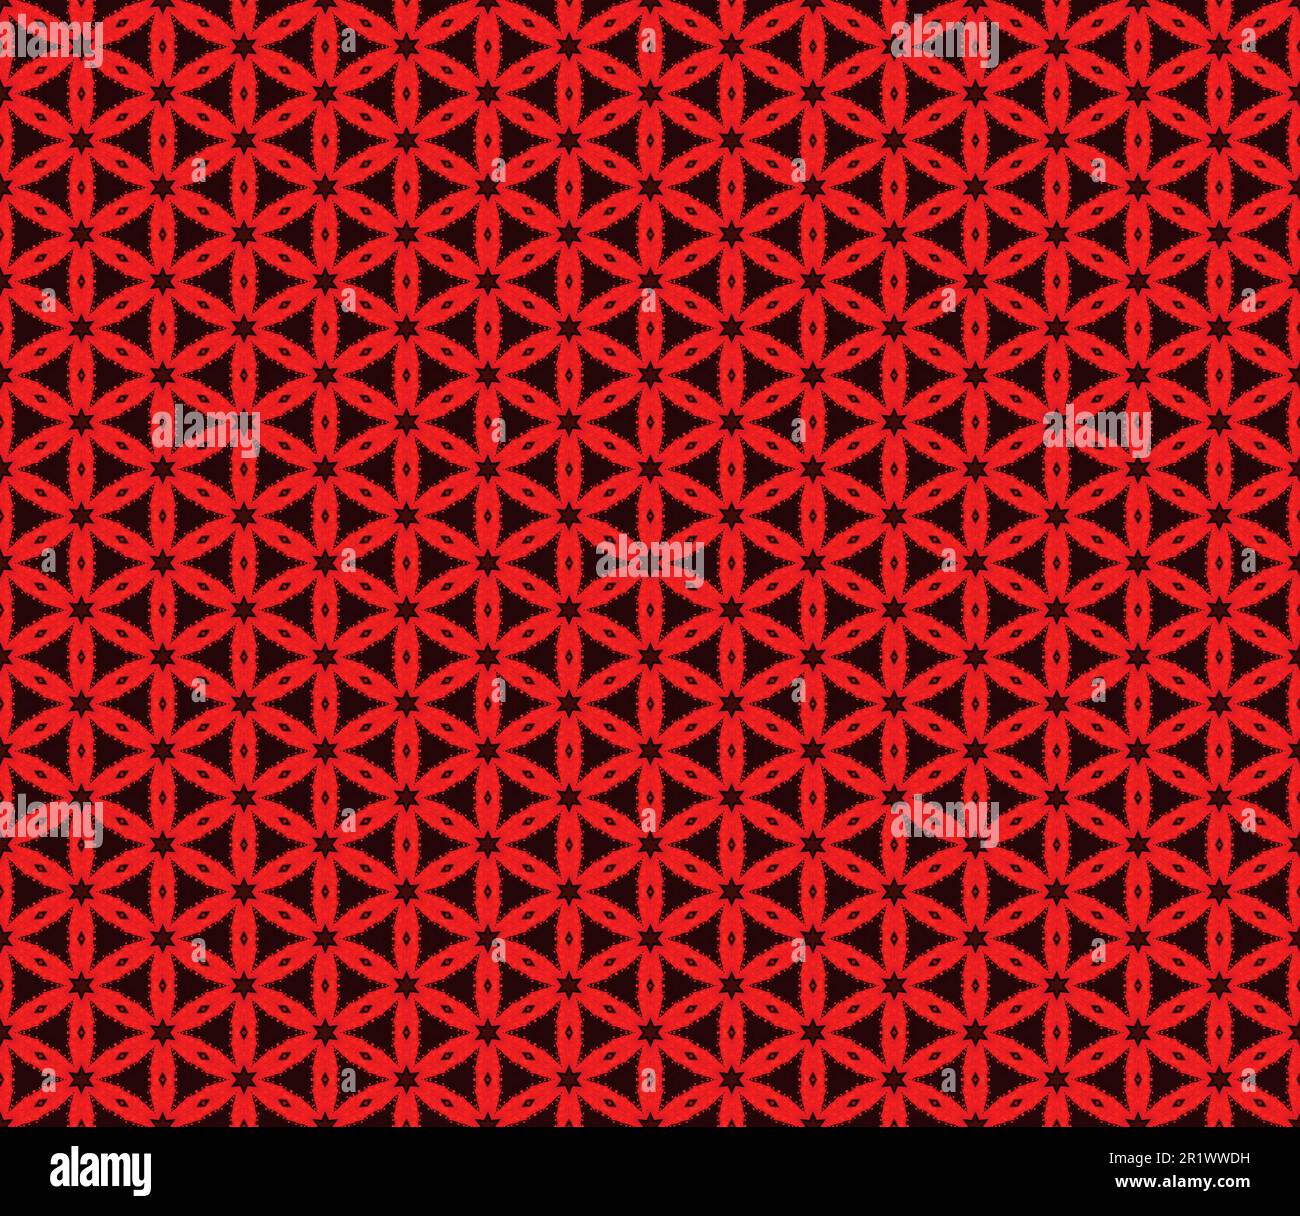 Geometric black and white seamless pattern repeating lattice motif digital art with stars.. Abstract background wallpaper. Stock Photo